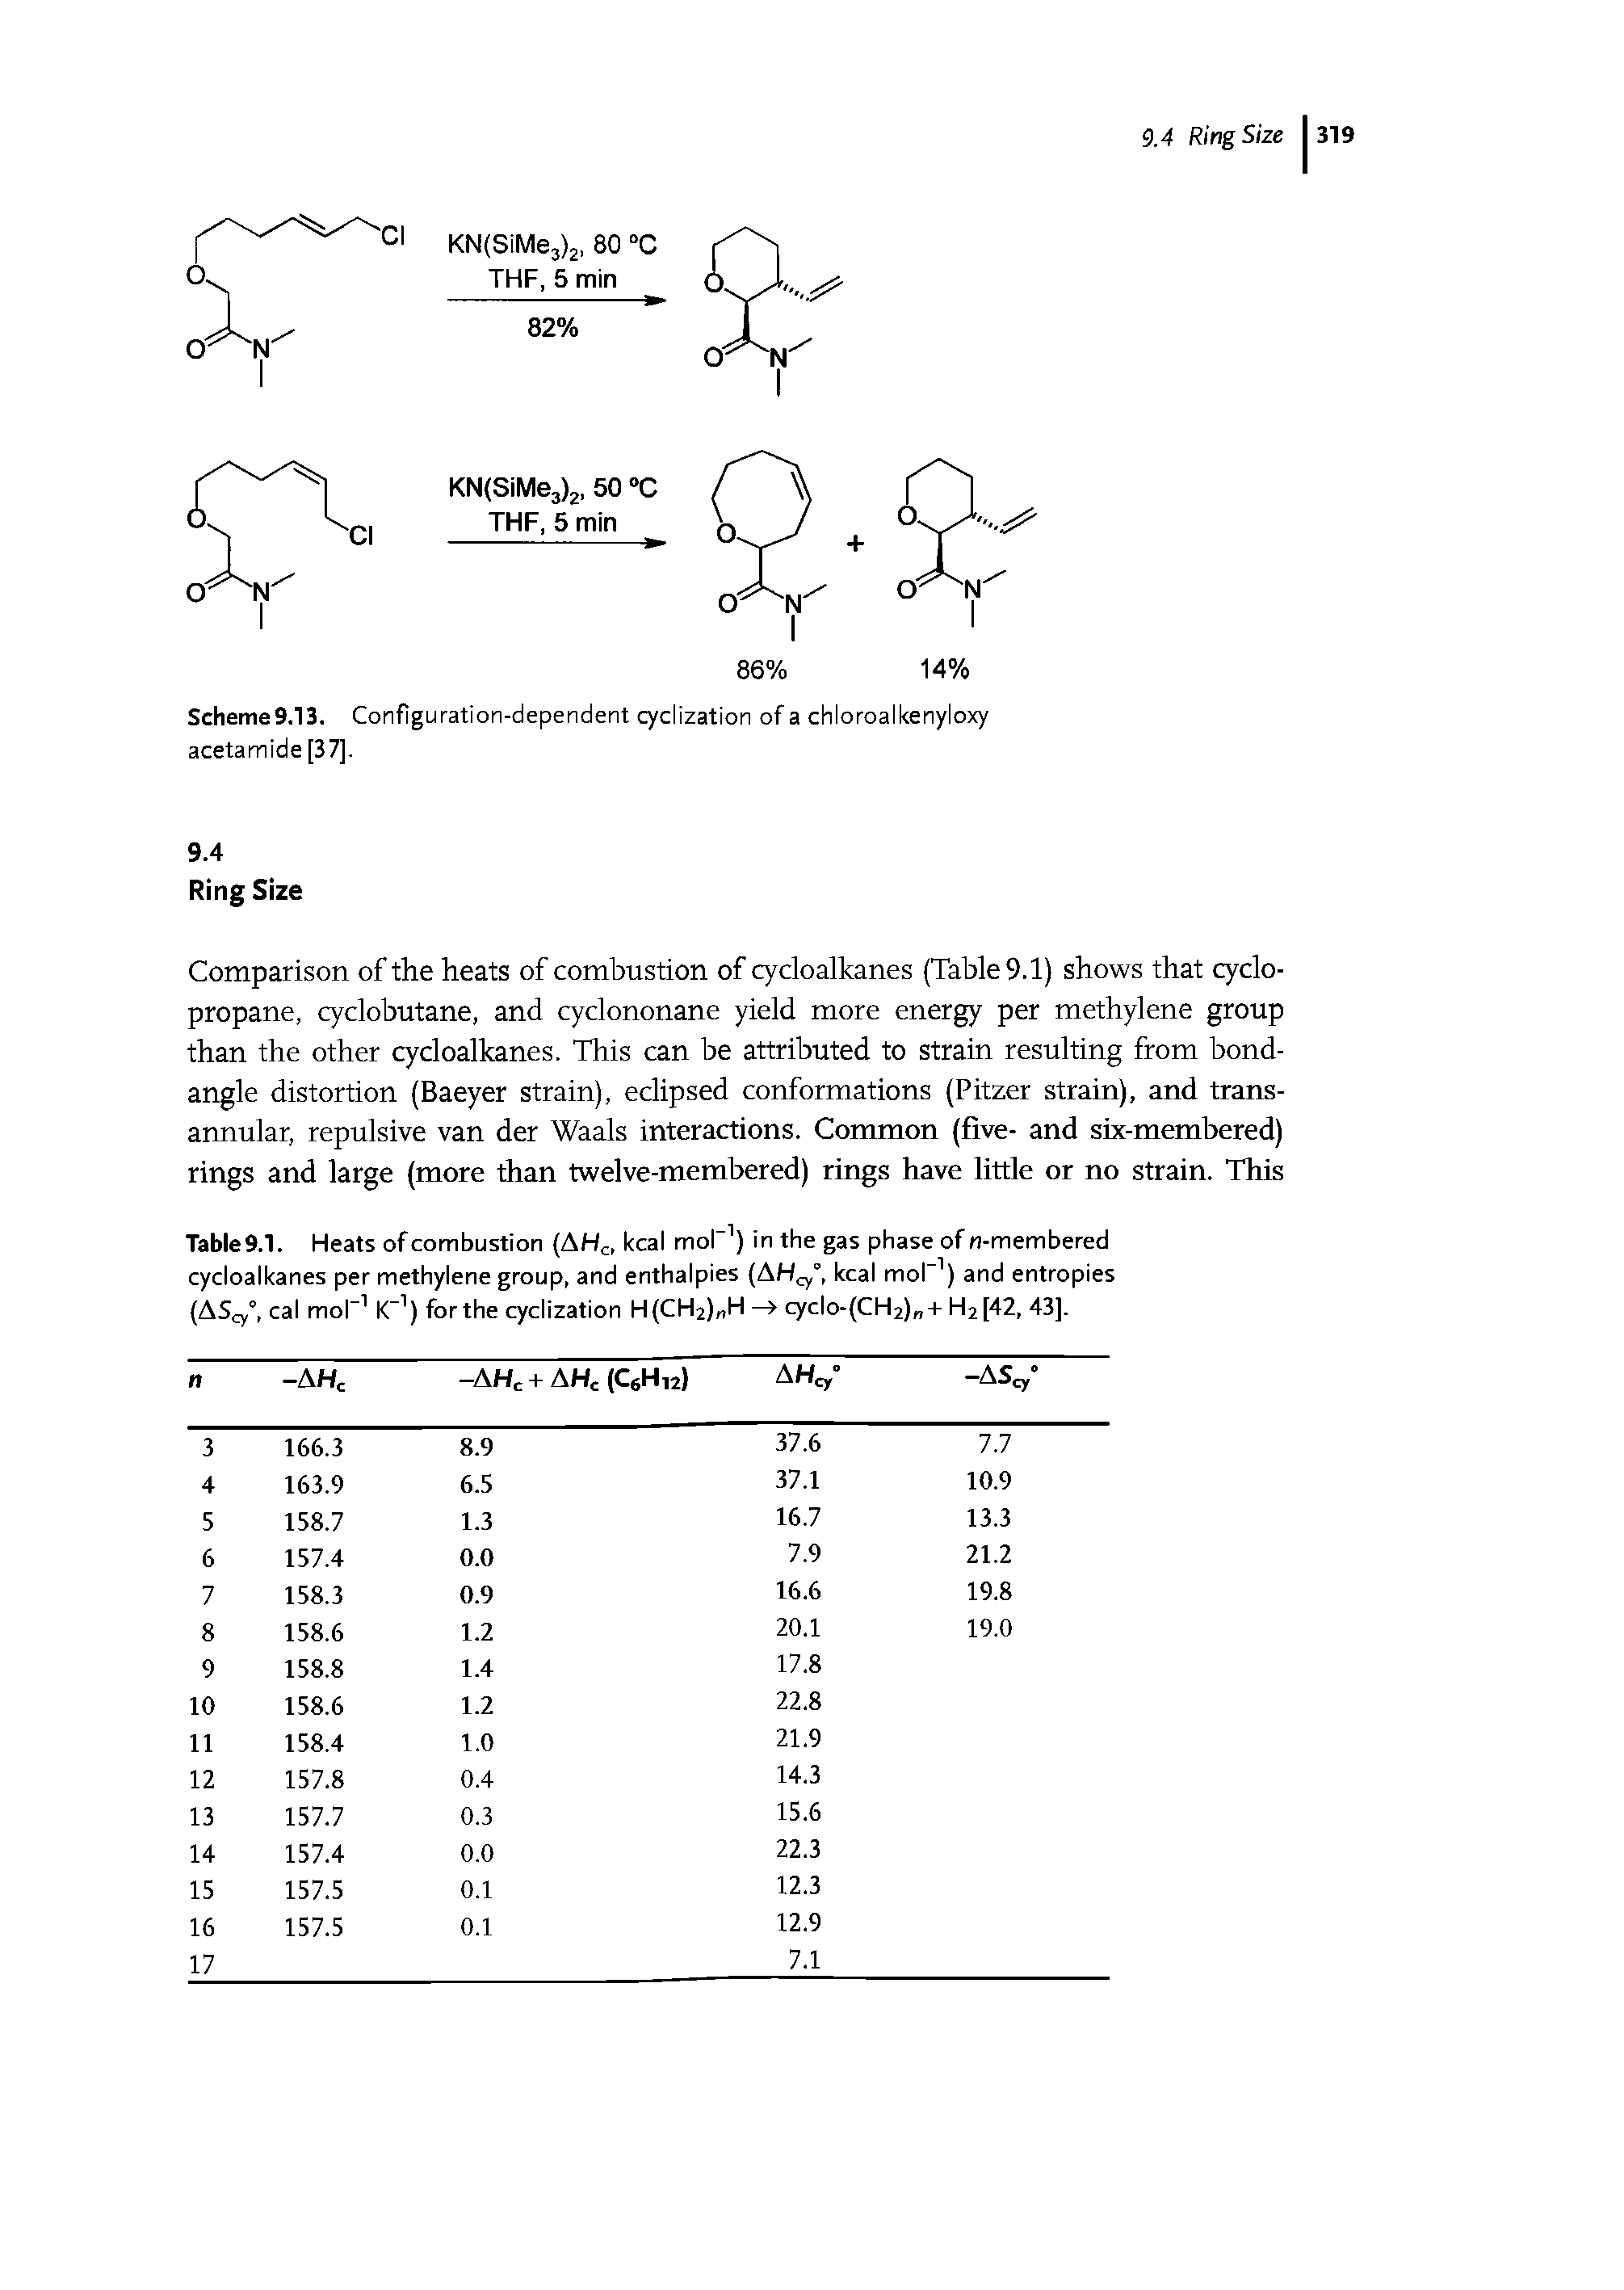 Table9.1. Heats of combustion (AHC, kcal mol-1) in the gas phase of n-membered cycloalkanes per methylene group, and enthalpies (AH, kcal mol-1) and entropies (AScy0, cal mol- K- ) forthe cyclization H(CH2) H —> cyclo-(CH2) + H2[42, 43],...